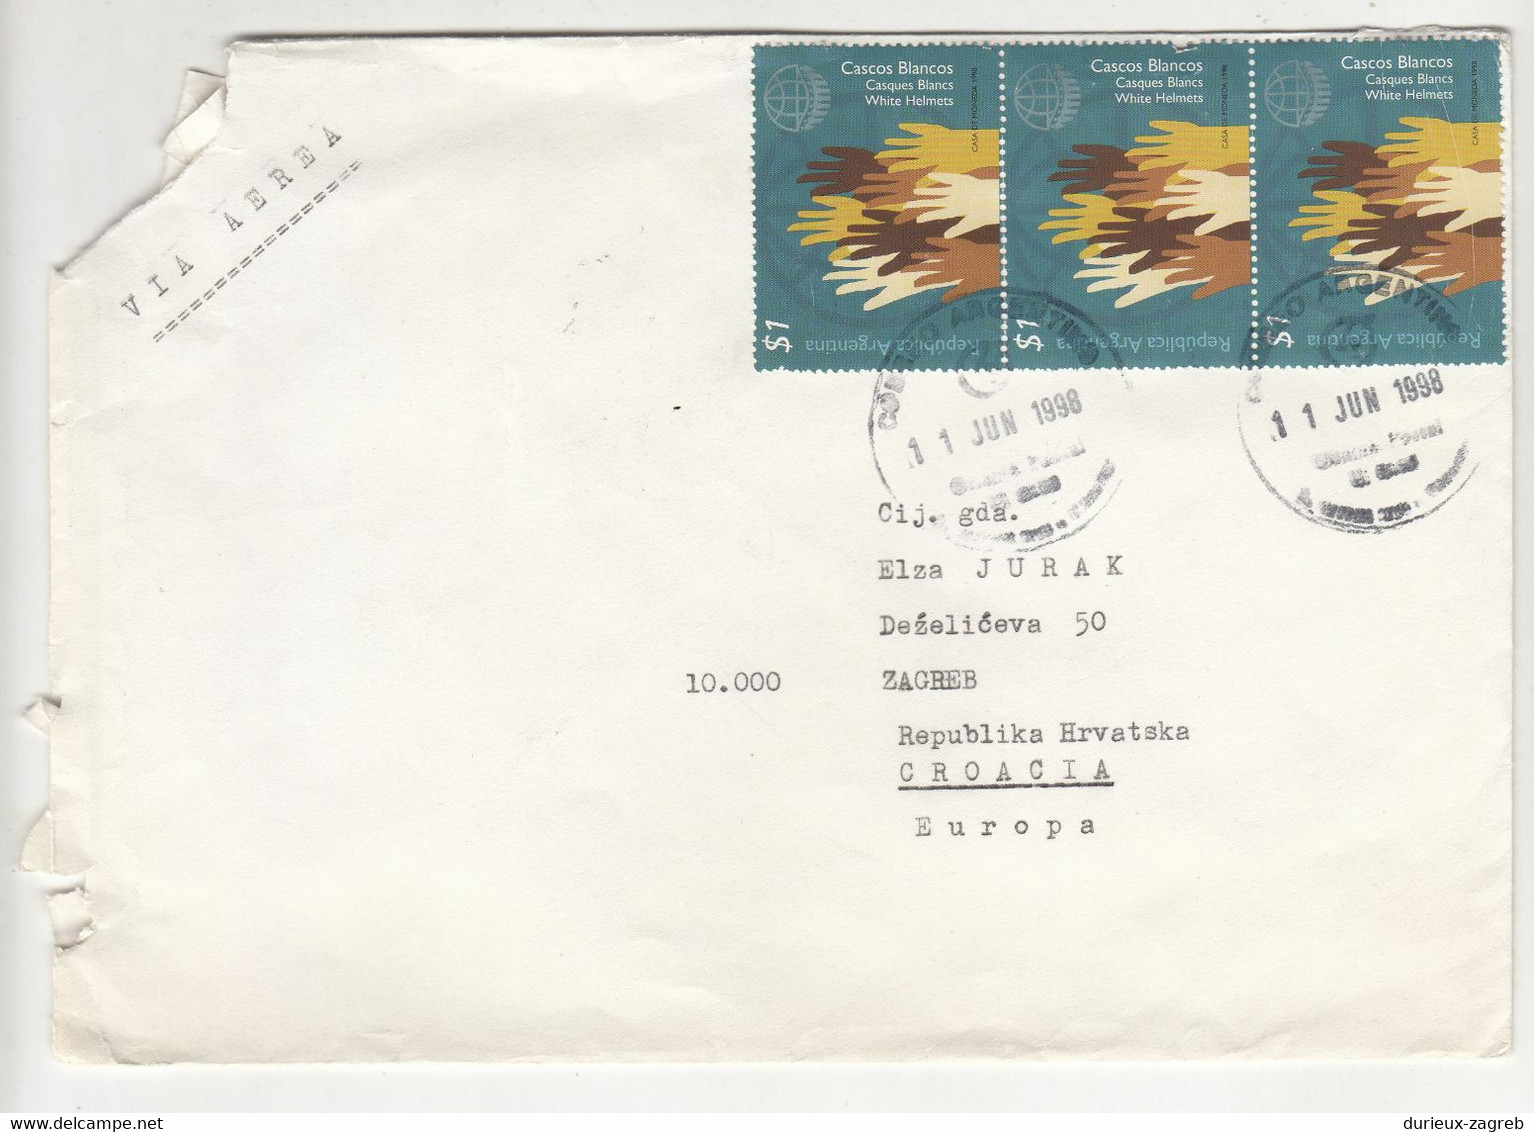 Argentina Letter Cover Posted Air Mail 1998 To Croatia B211015 - Covers & Documents